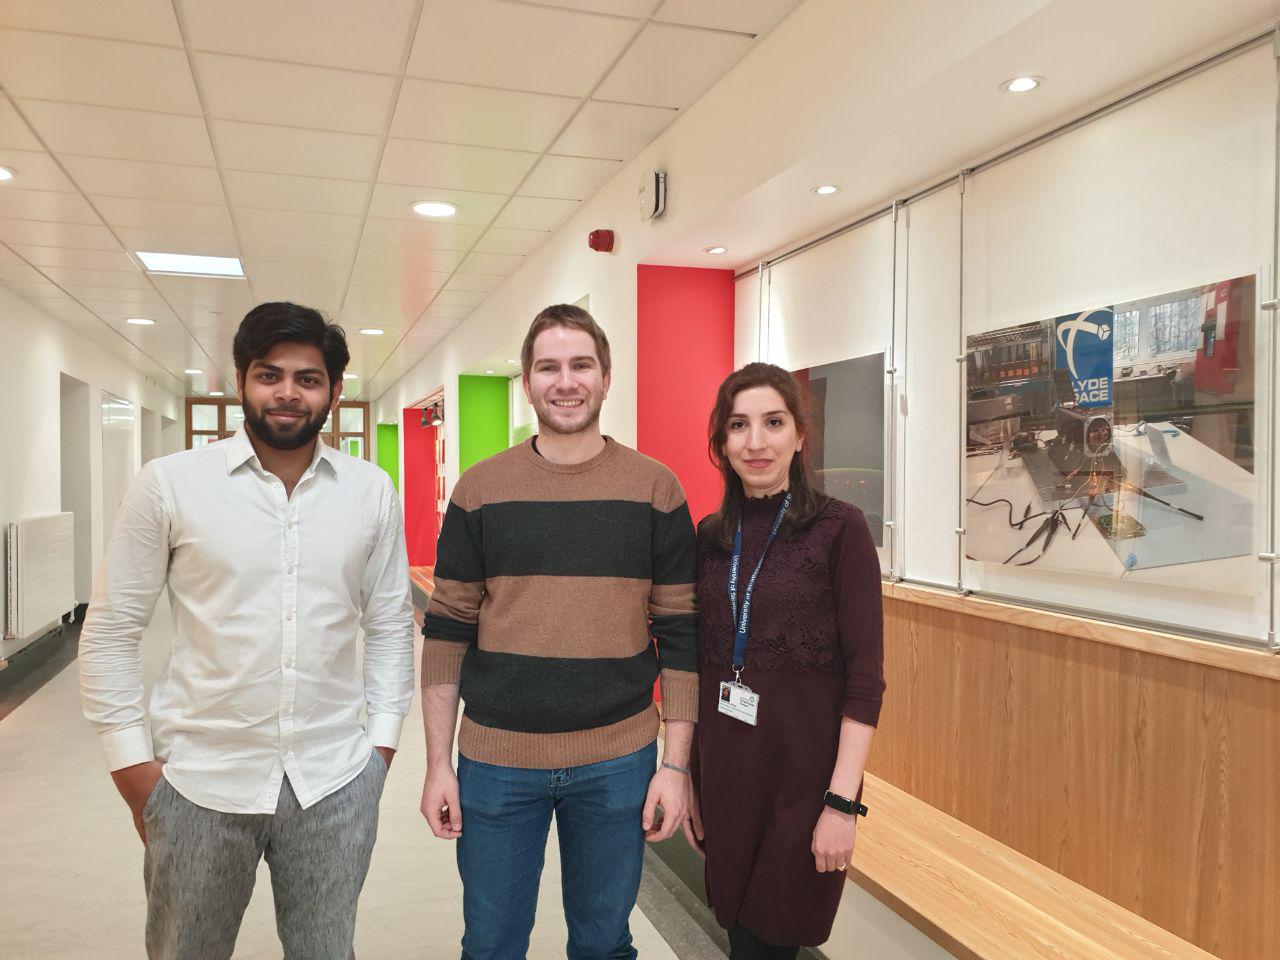 Group shot of new PhD students who joined ACG in early 2019: from left to right Malik, Miguel and Shima